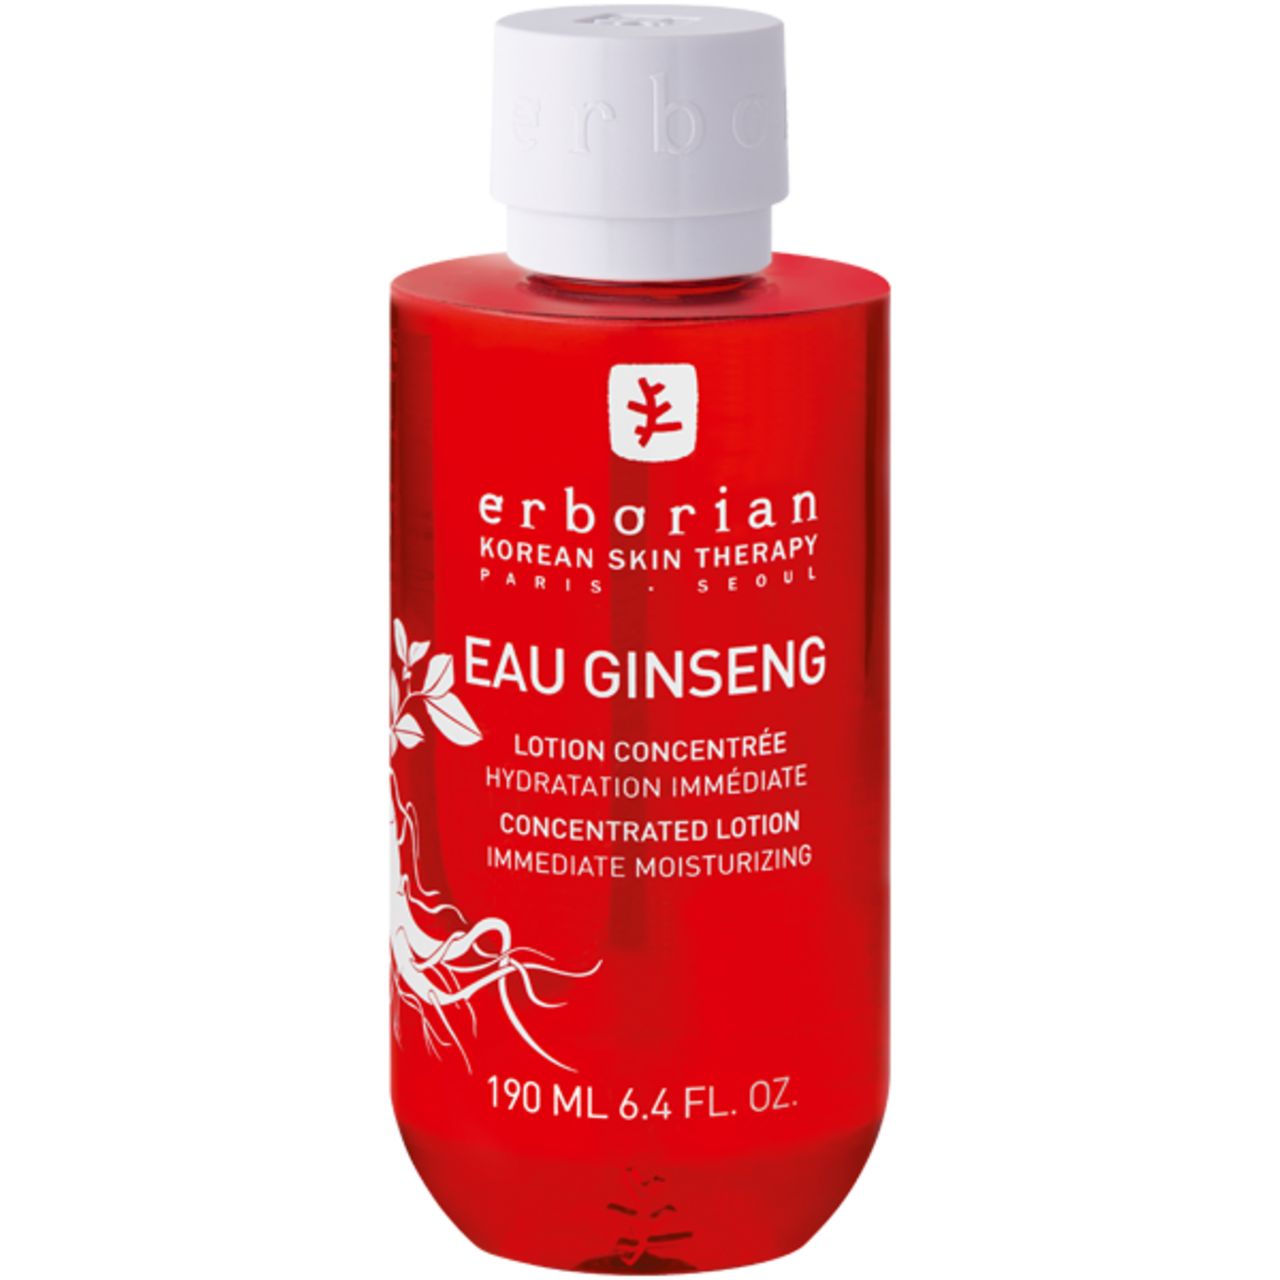 Erborian Korean Skin Therapy Paris Seoul Eau Ginseng Concentrated Lotion